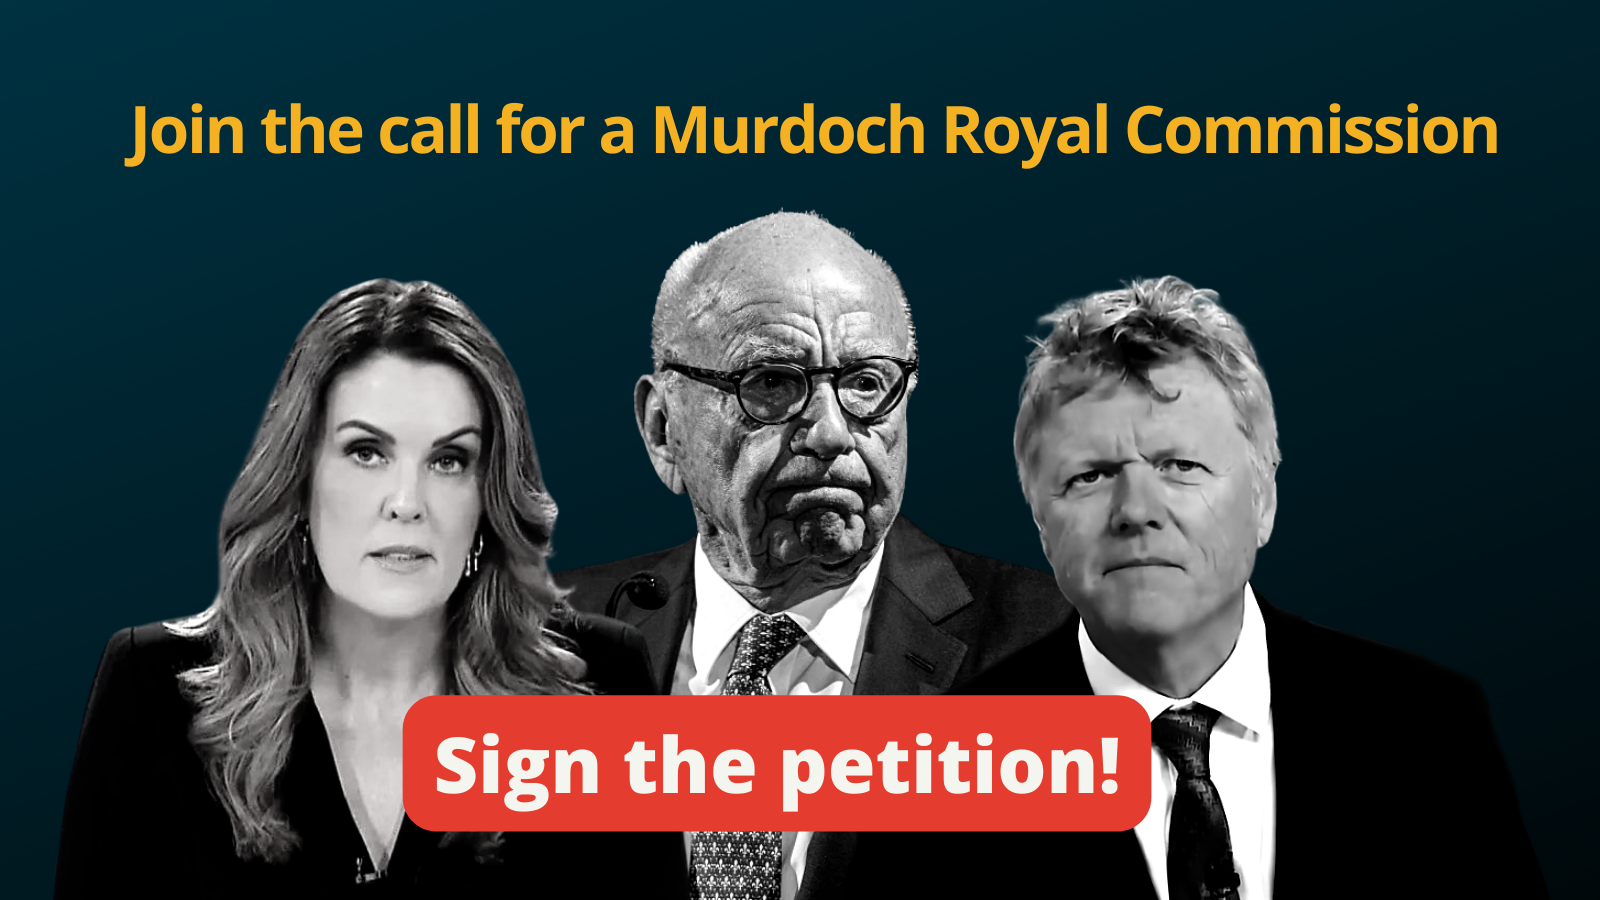 Black and white photos of Peta Credlin, Rupert Murdoch and Andrew Bolt with text "Join the call for a Murdoch Royal Commission. Sign the Petition!"